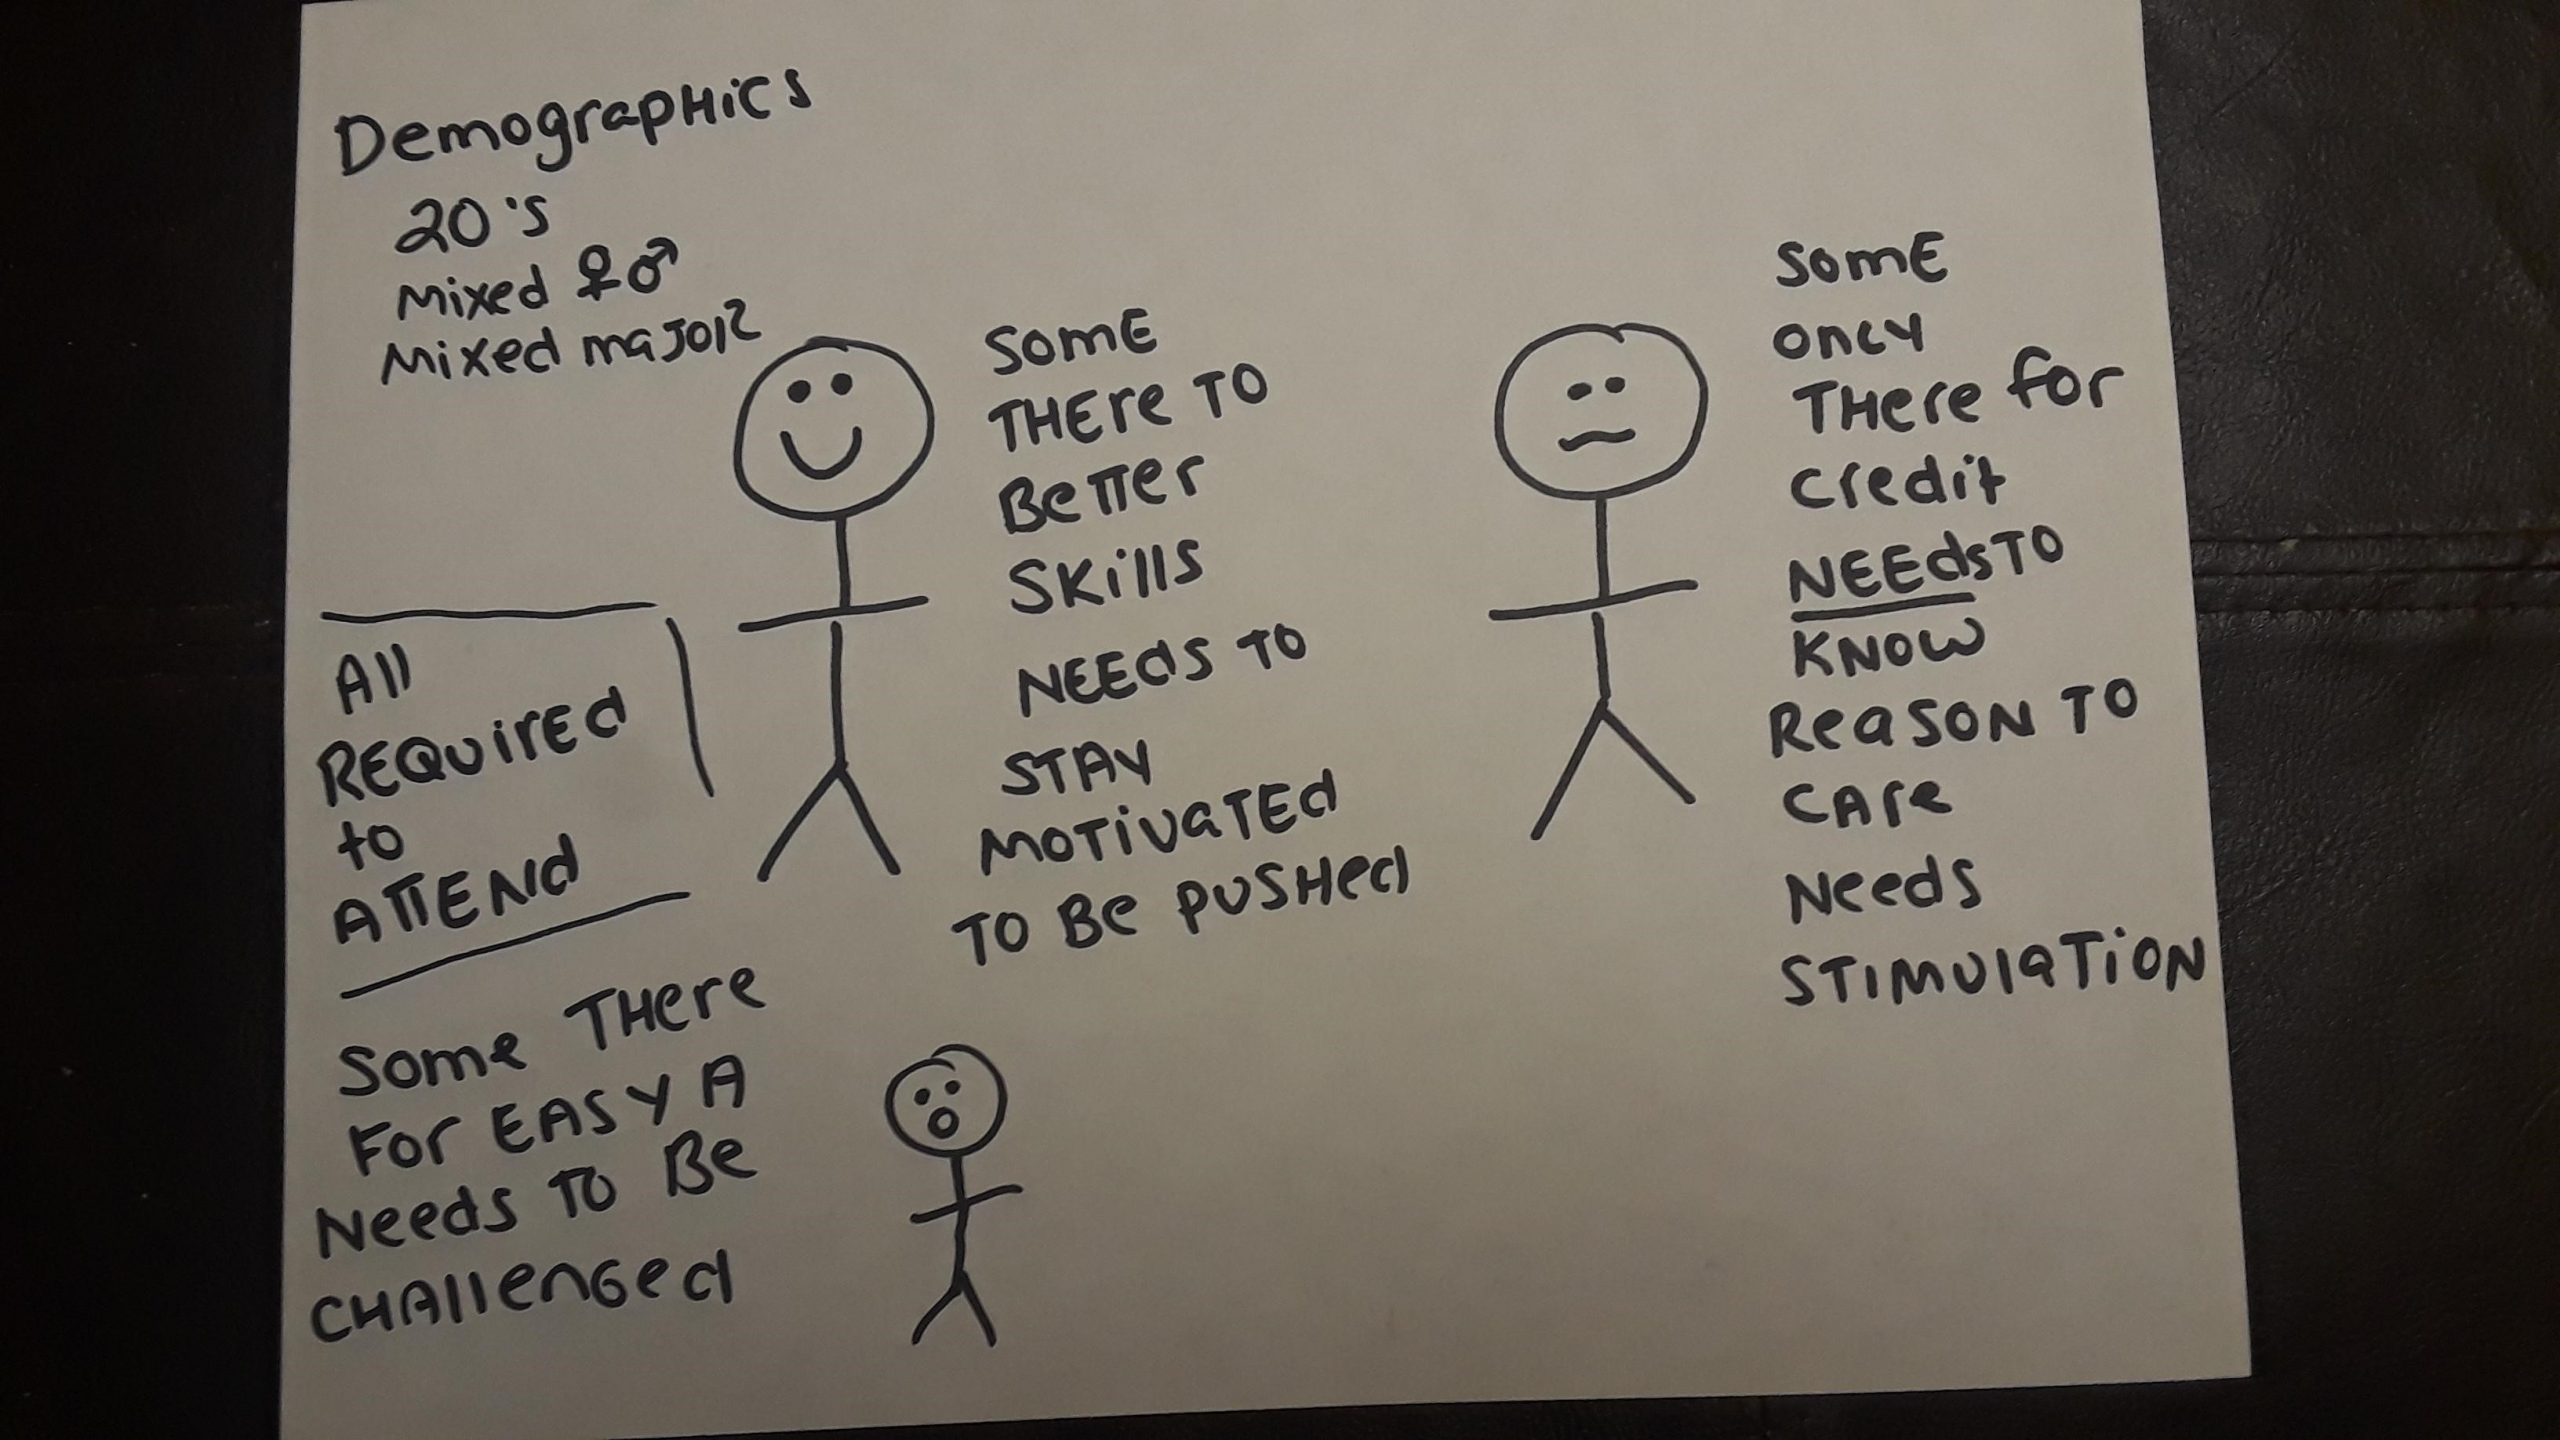 Several stick figures on a page, with notes about their demographics.